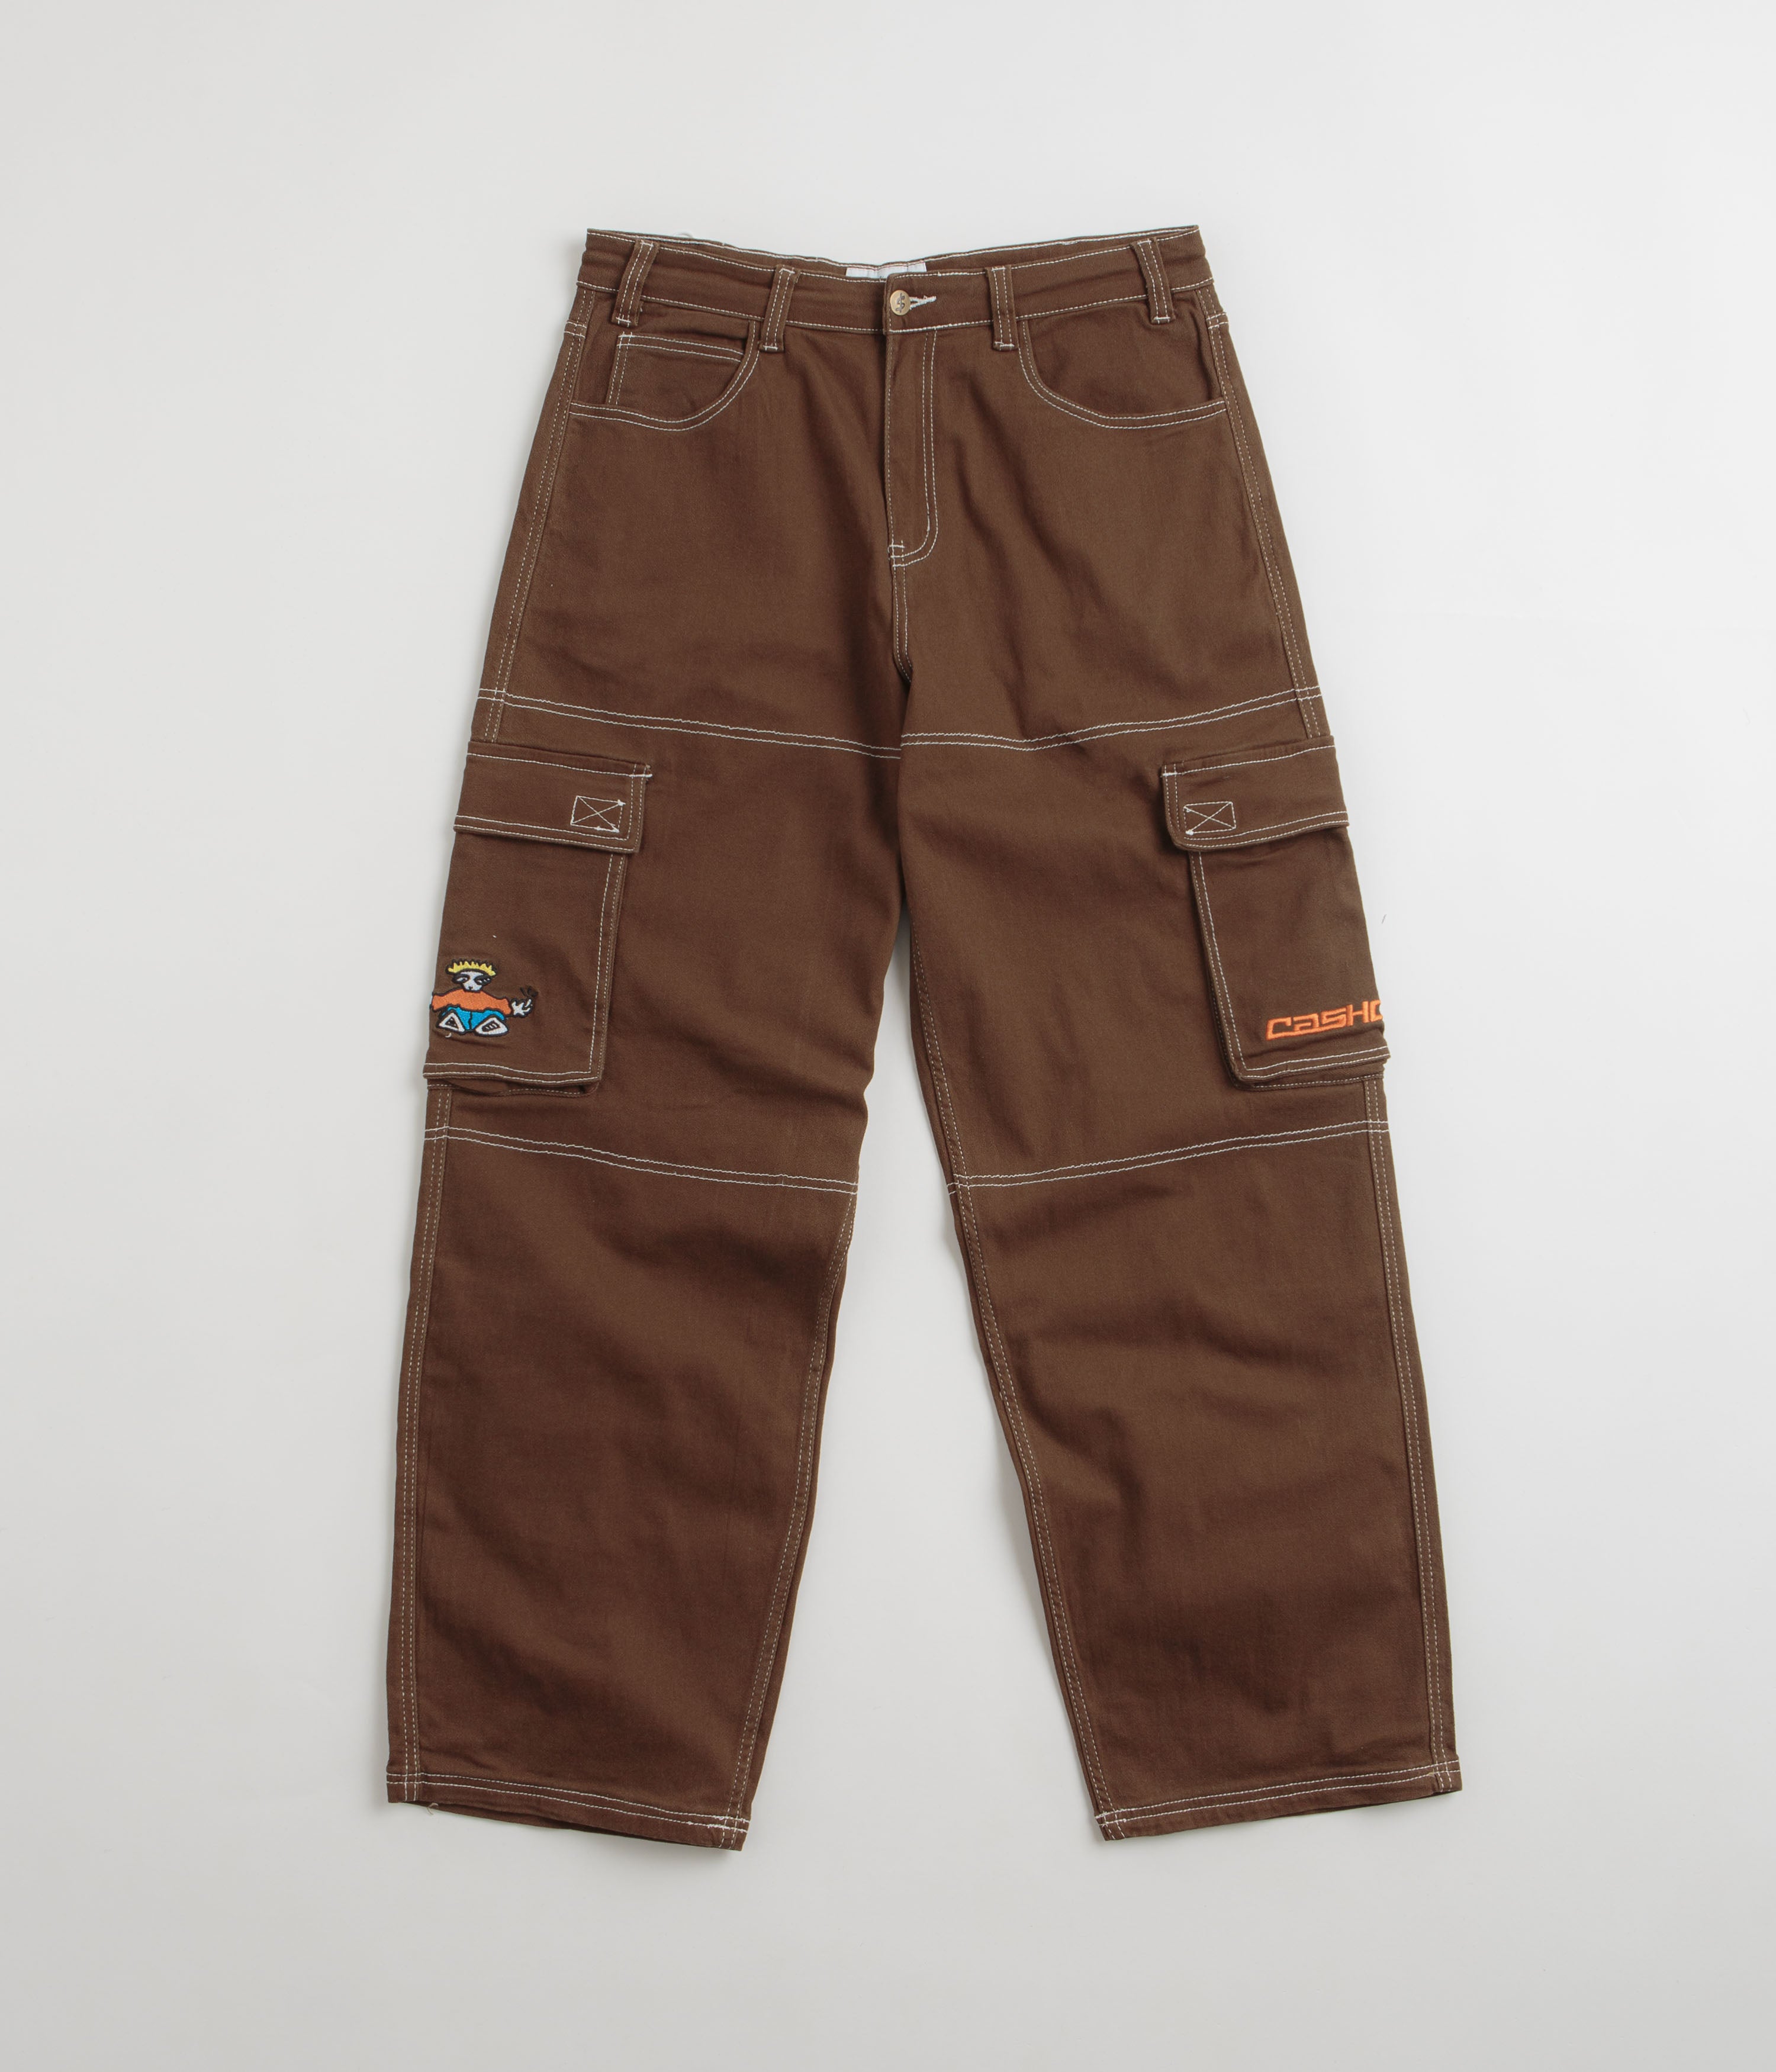 Cash Only Aleka Cargo Jeans - Washed Army | Flatspot